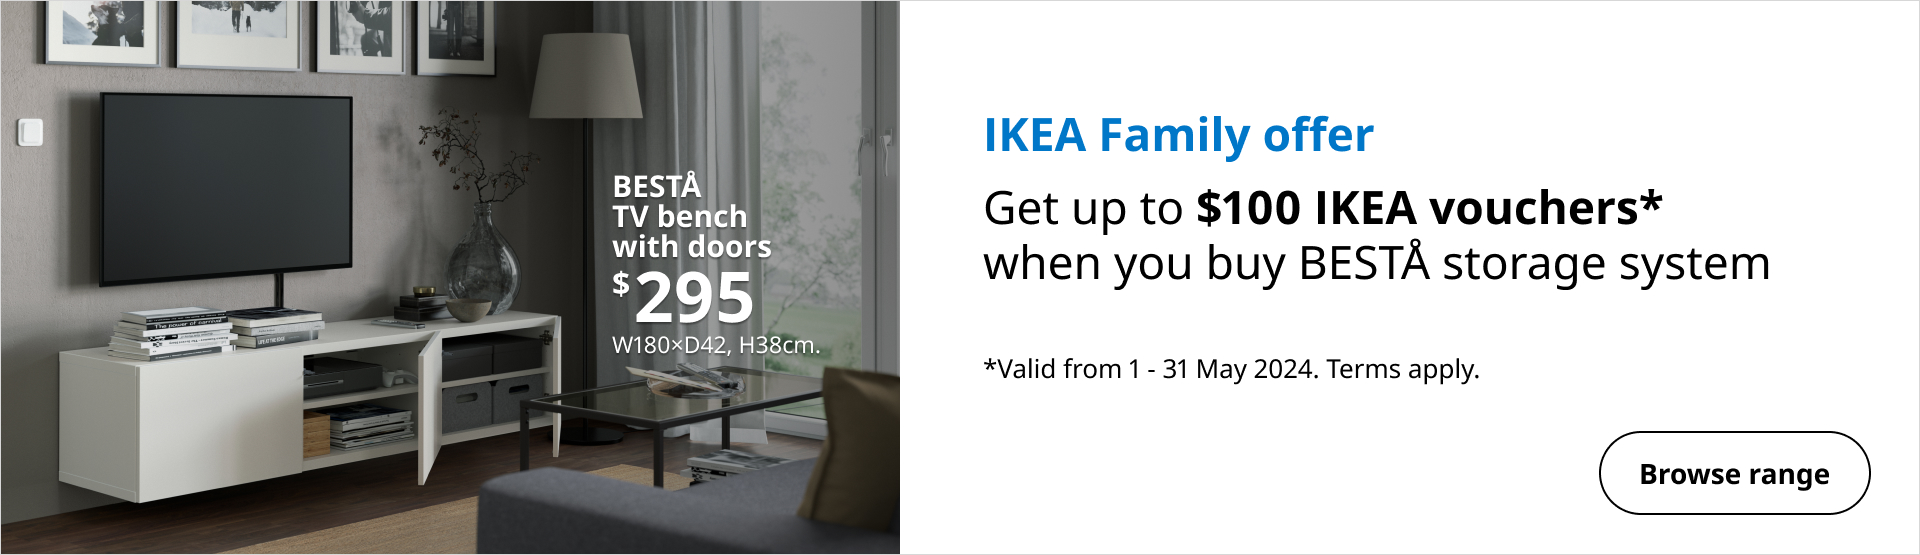 IKEA Family Besta Product Offers